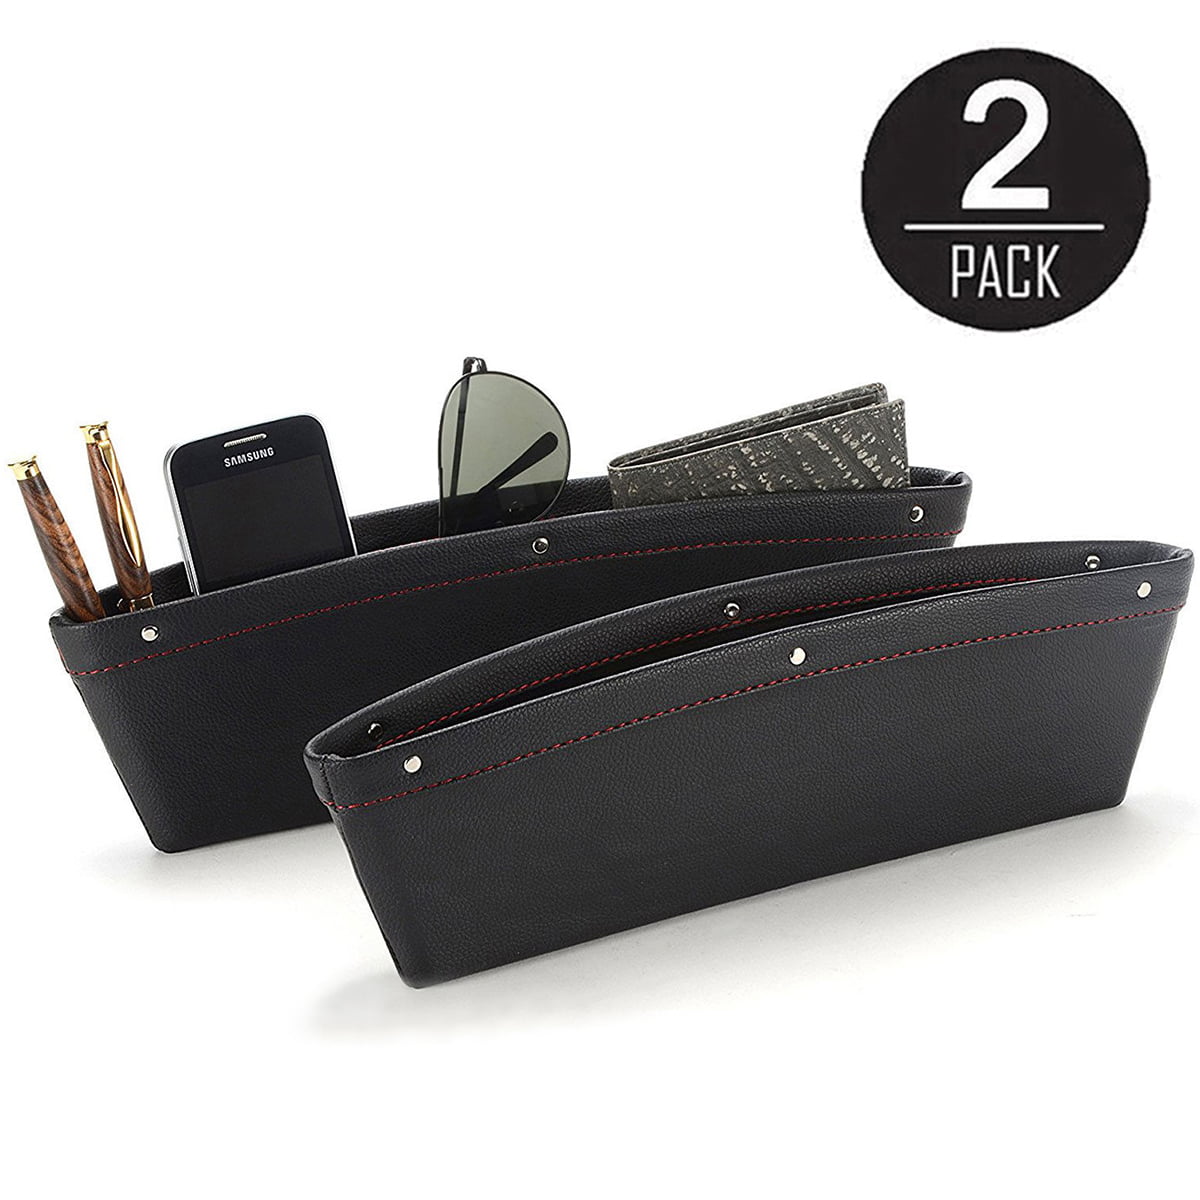 2 Pack Car Seat Side Gap Filler Console Organizer PU Leather Car Pocket Part Toy